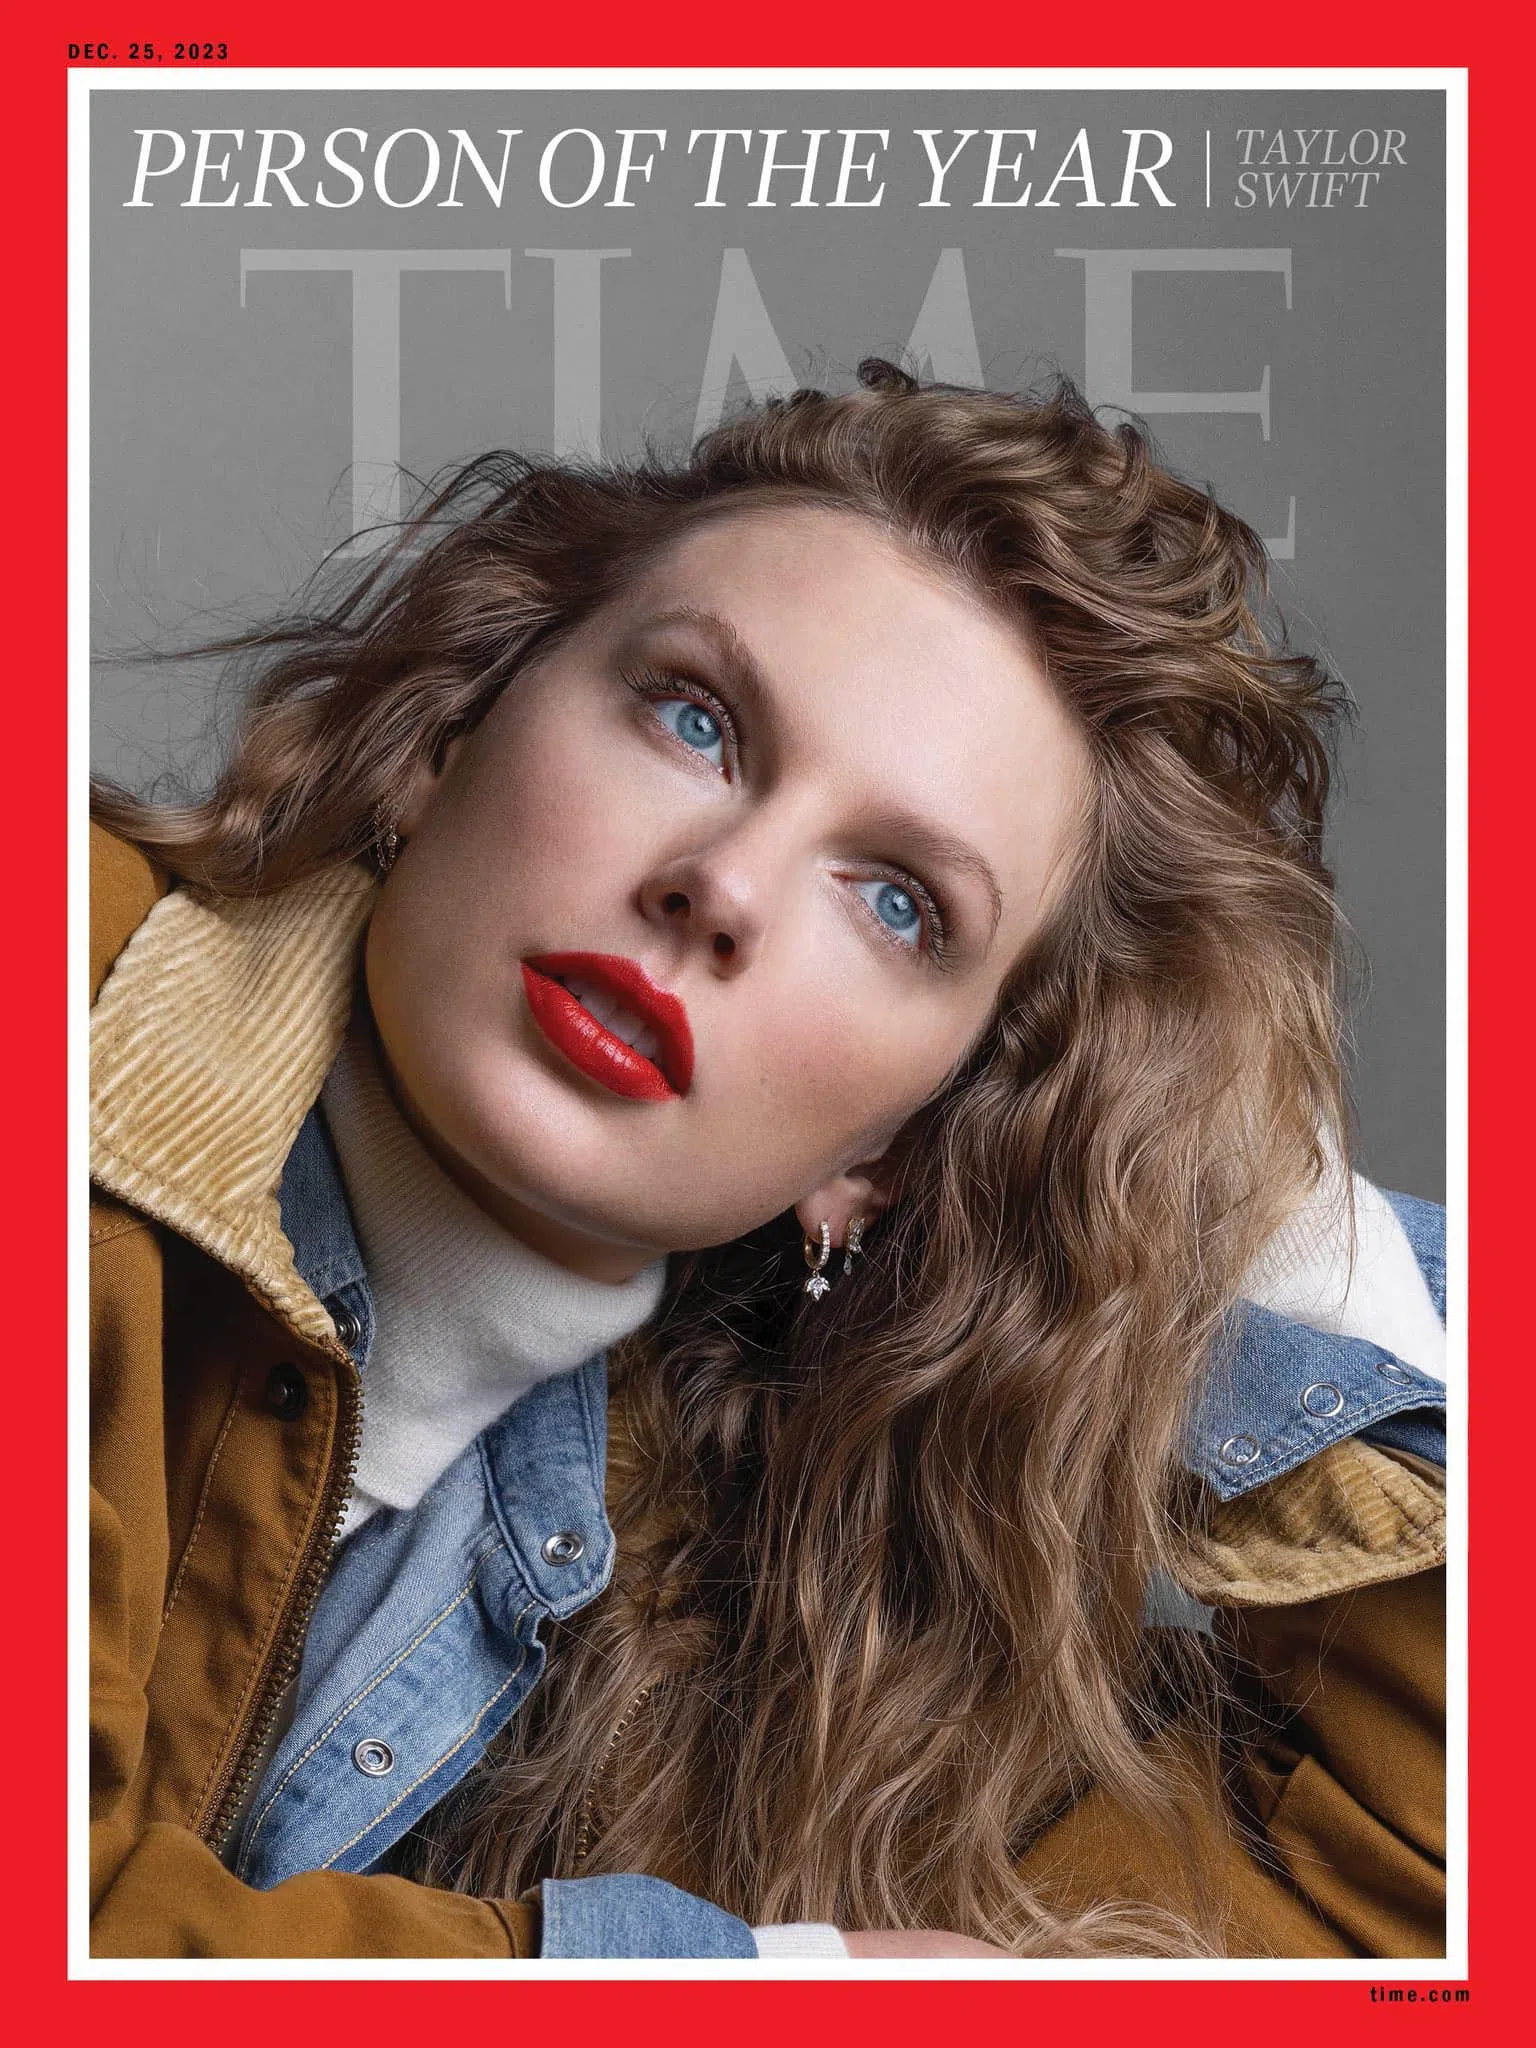 Time's Person of The Year is ...